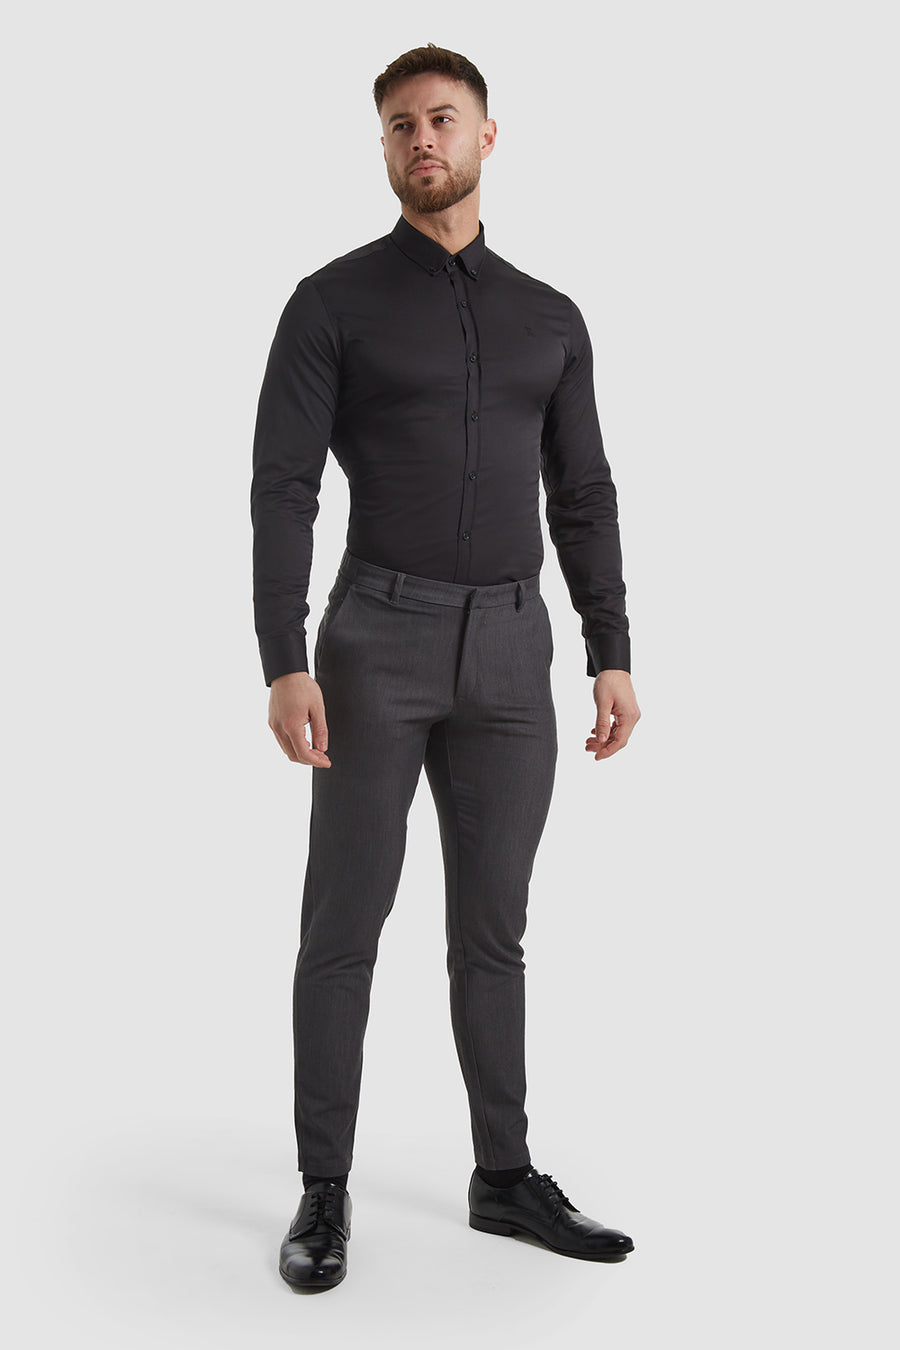 Athletic Fit Essential Pants 2.0 In Charcoal - TAILORED ATHLETE - USA